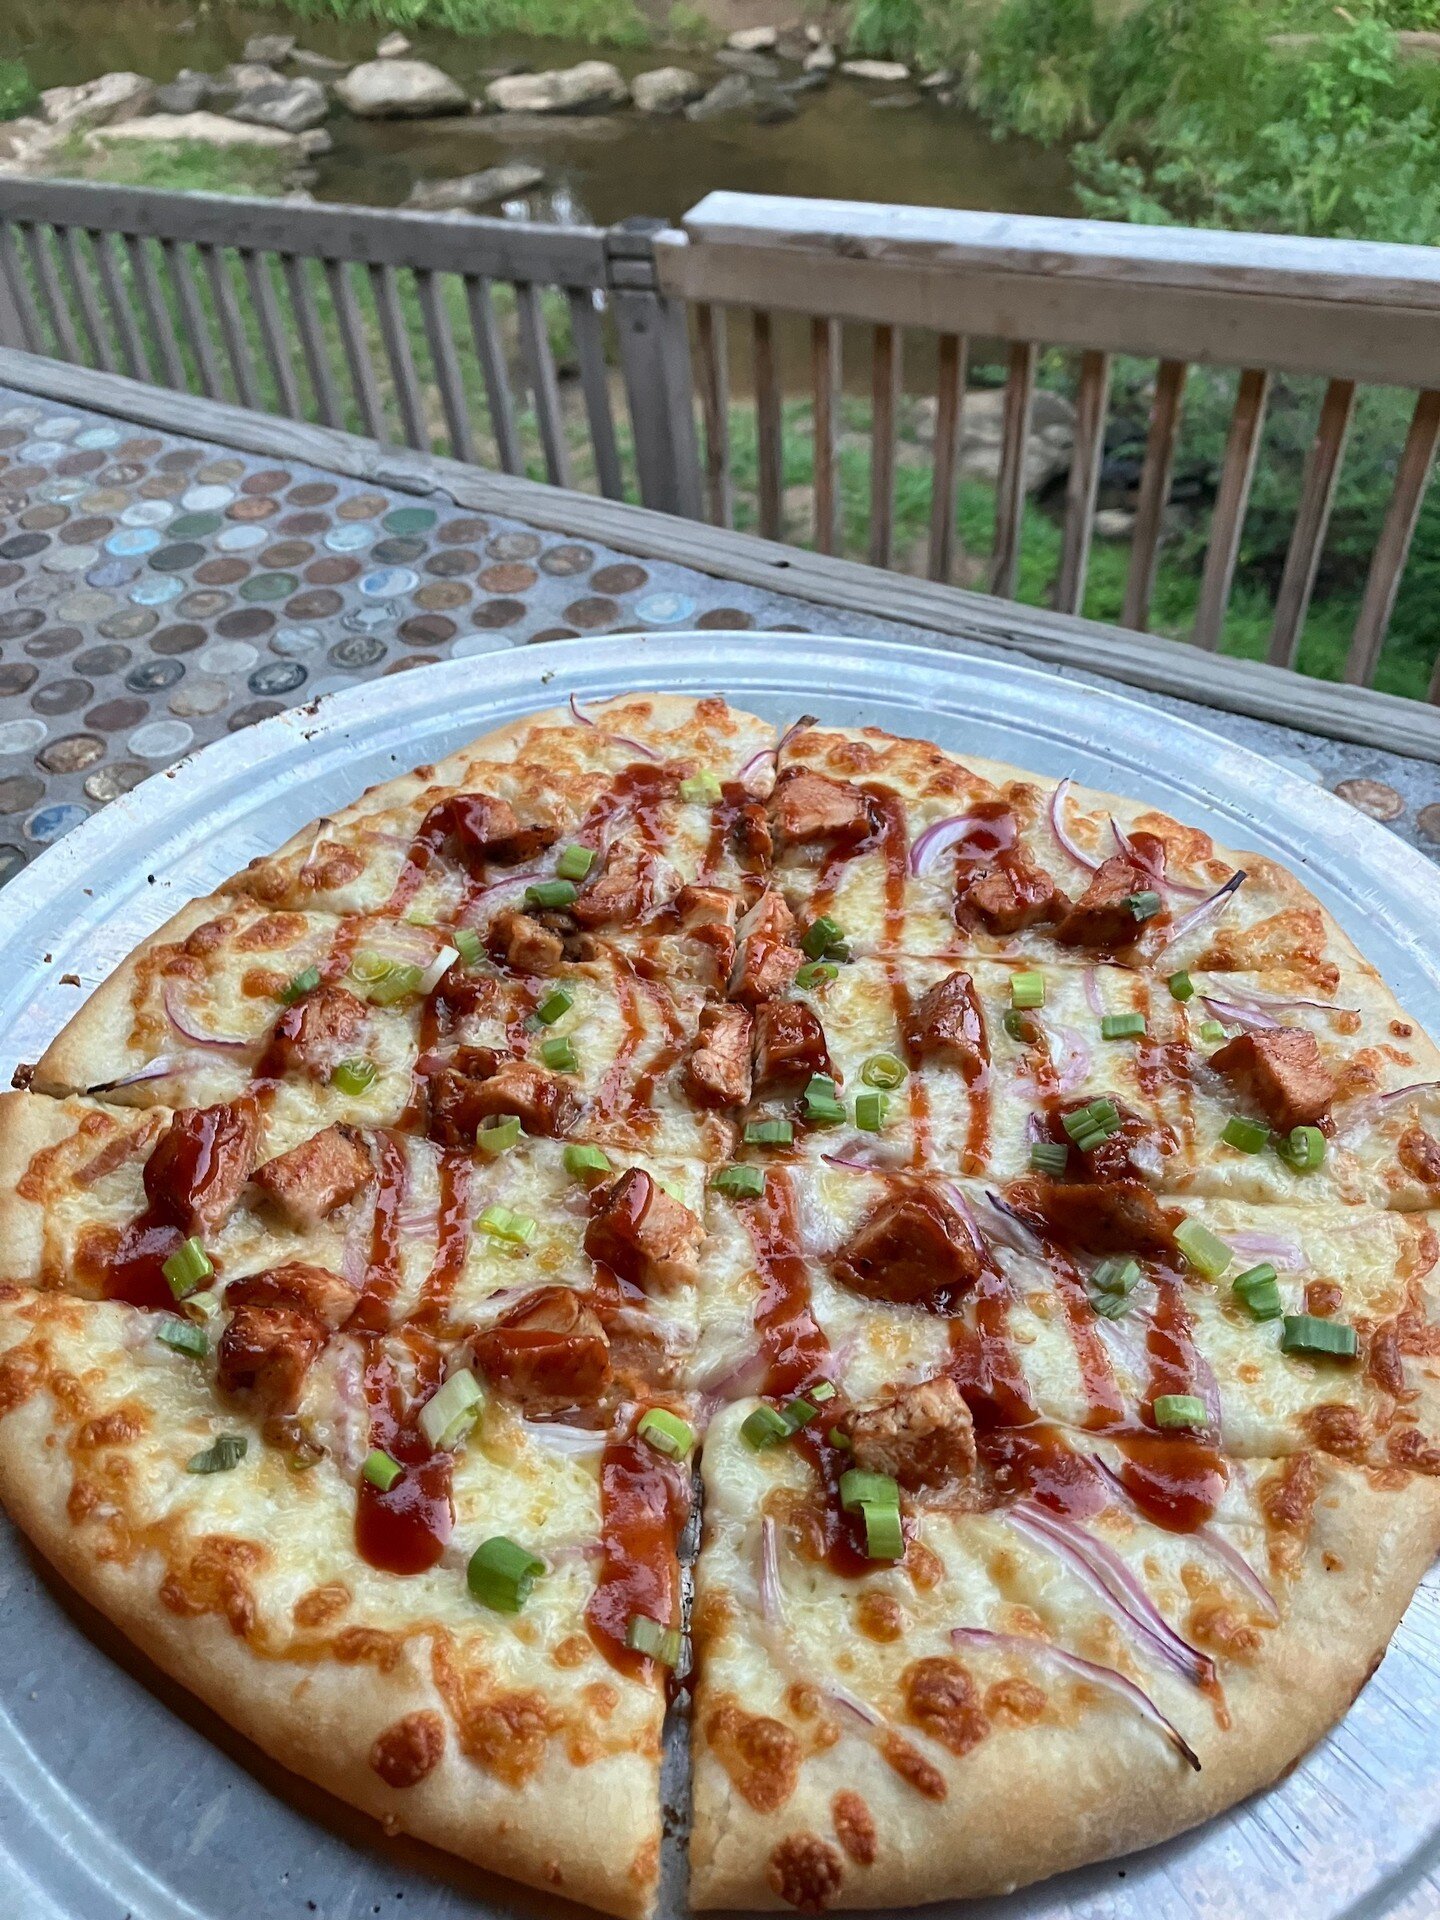 🍕 Weekend Special 🍕

BBQ Chicken Flatbread!! House-smoked chicken, olive oil, mozzarella, smoked provolone and thinly sliced red onions. #yum #avleats #eastasheville #pizzamyheart